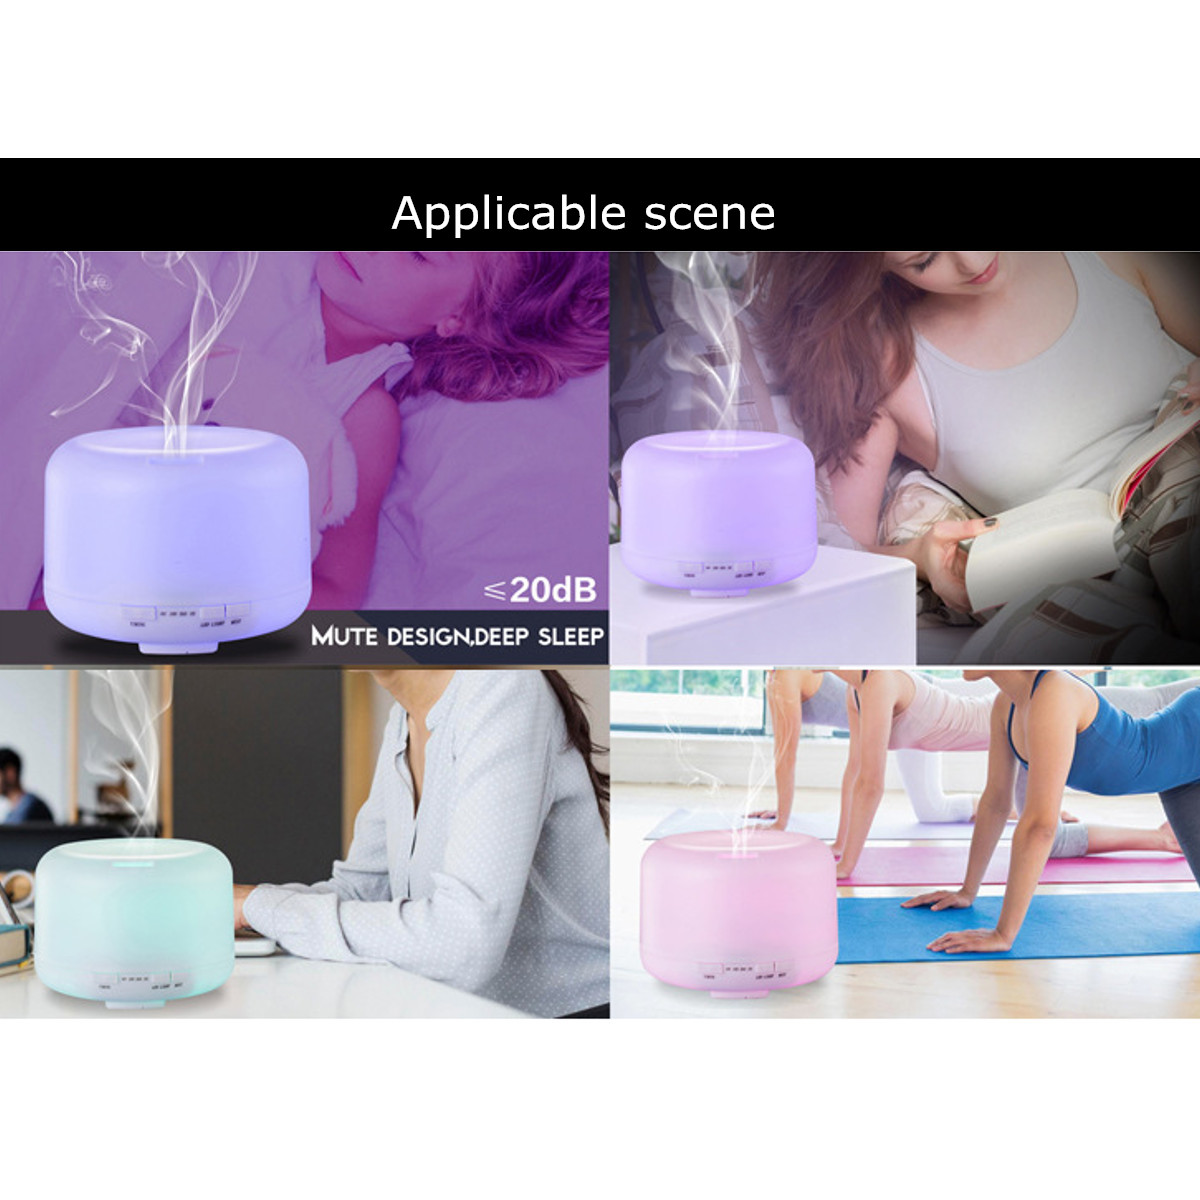 500ml-7-LED-Humidifier-Air-Aroma-Essential-Oil-Purifier-Diffuser-Aromatherapy-1255548